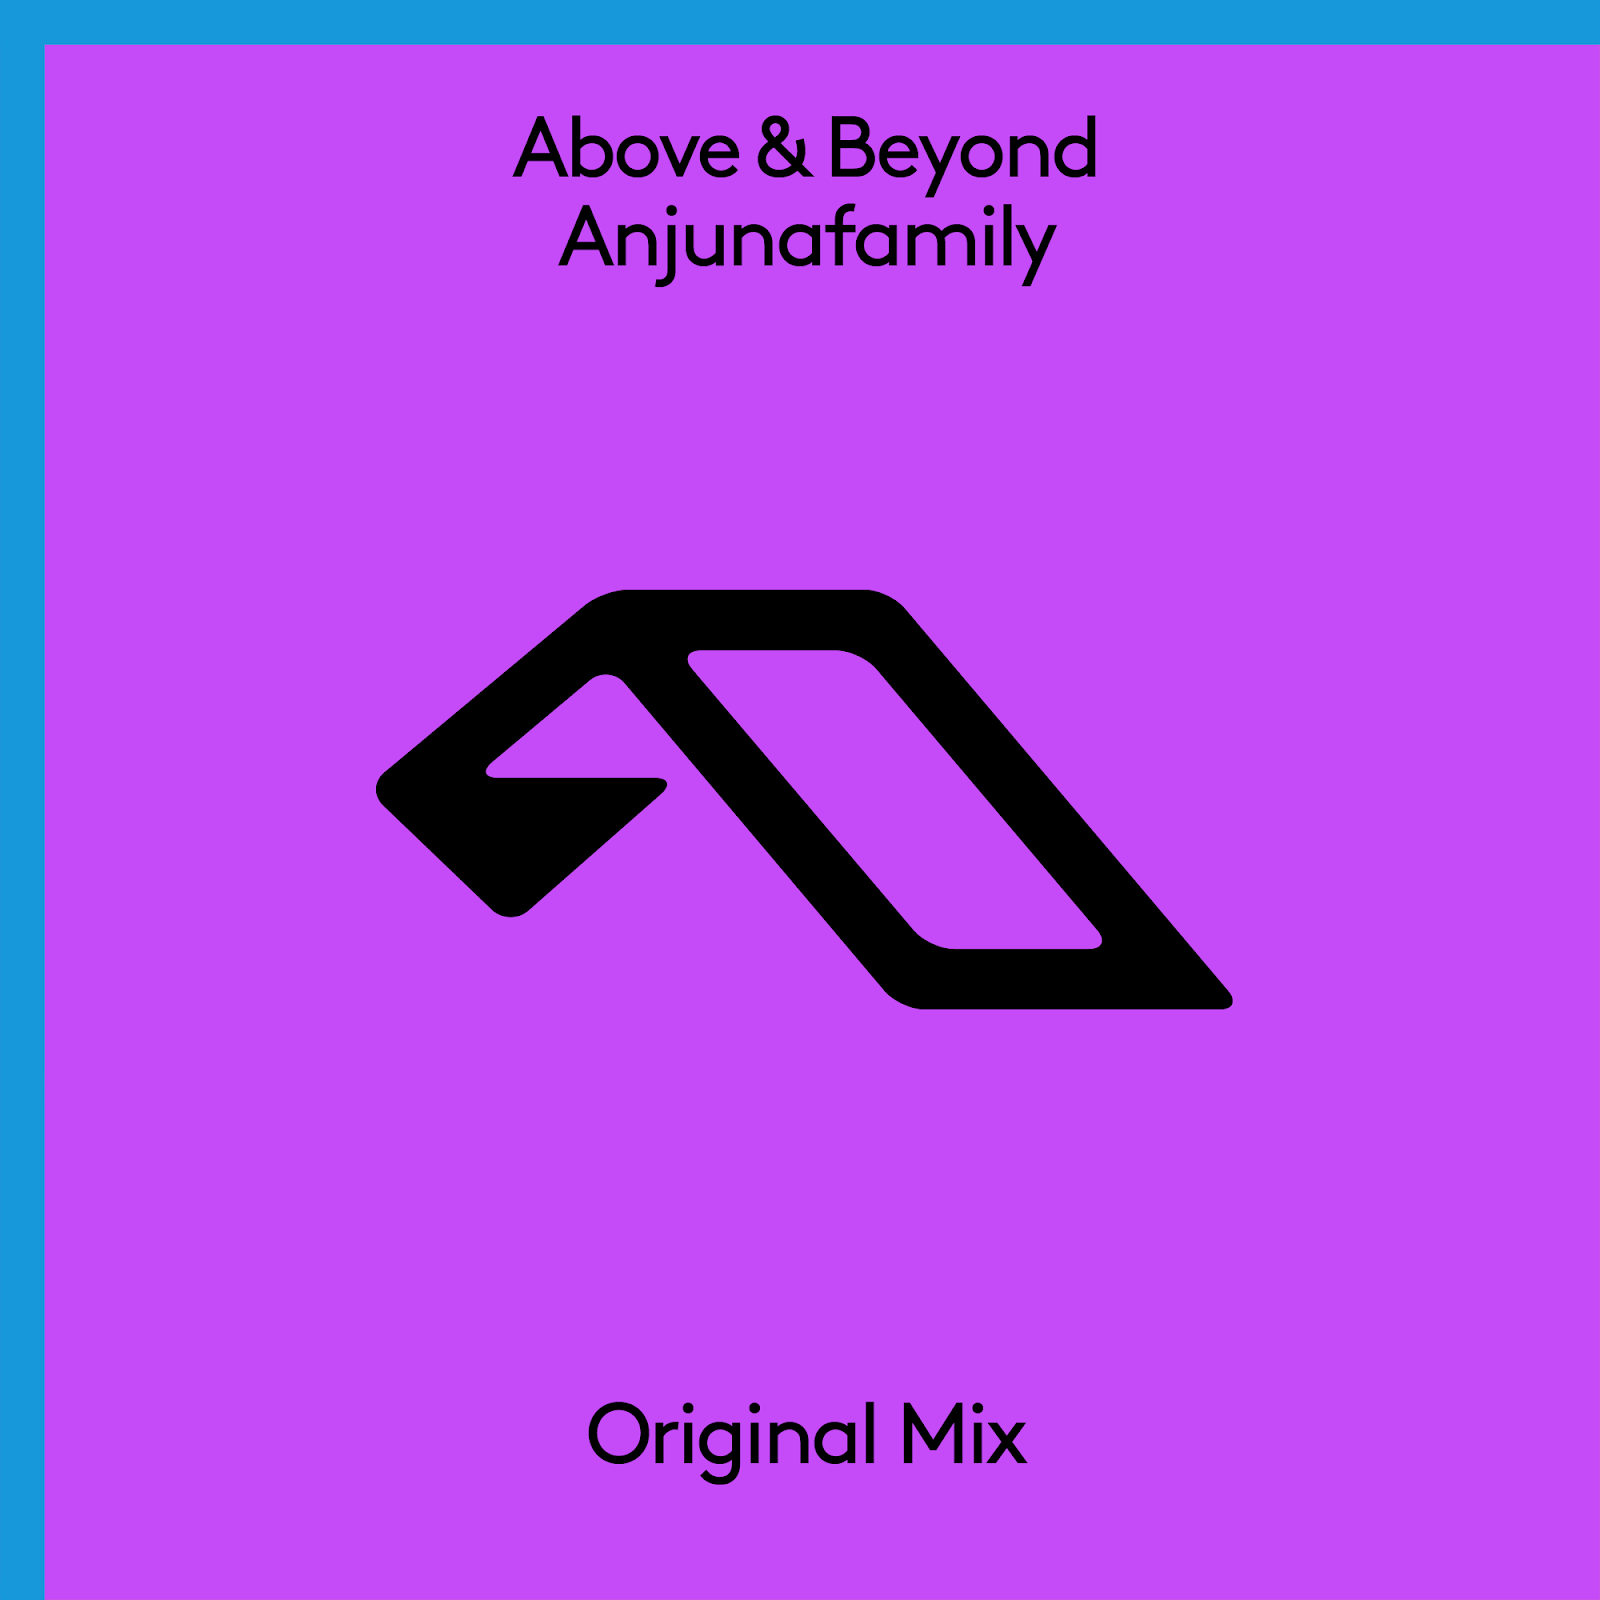 Above and Beyond presents Anjunafamily on Anjunabeats